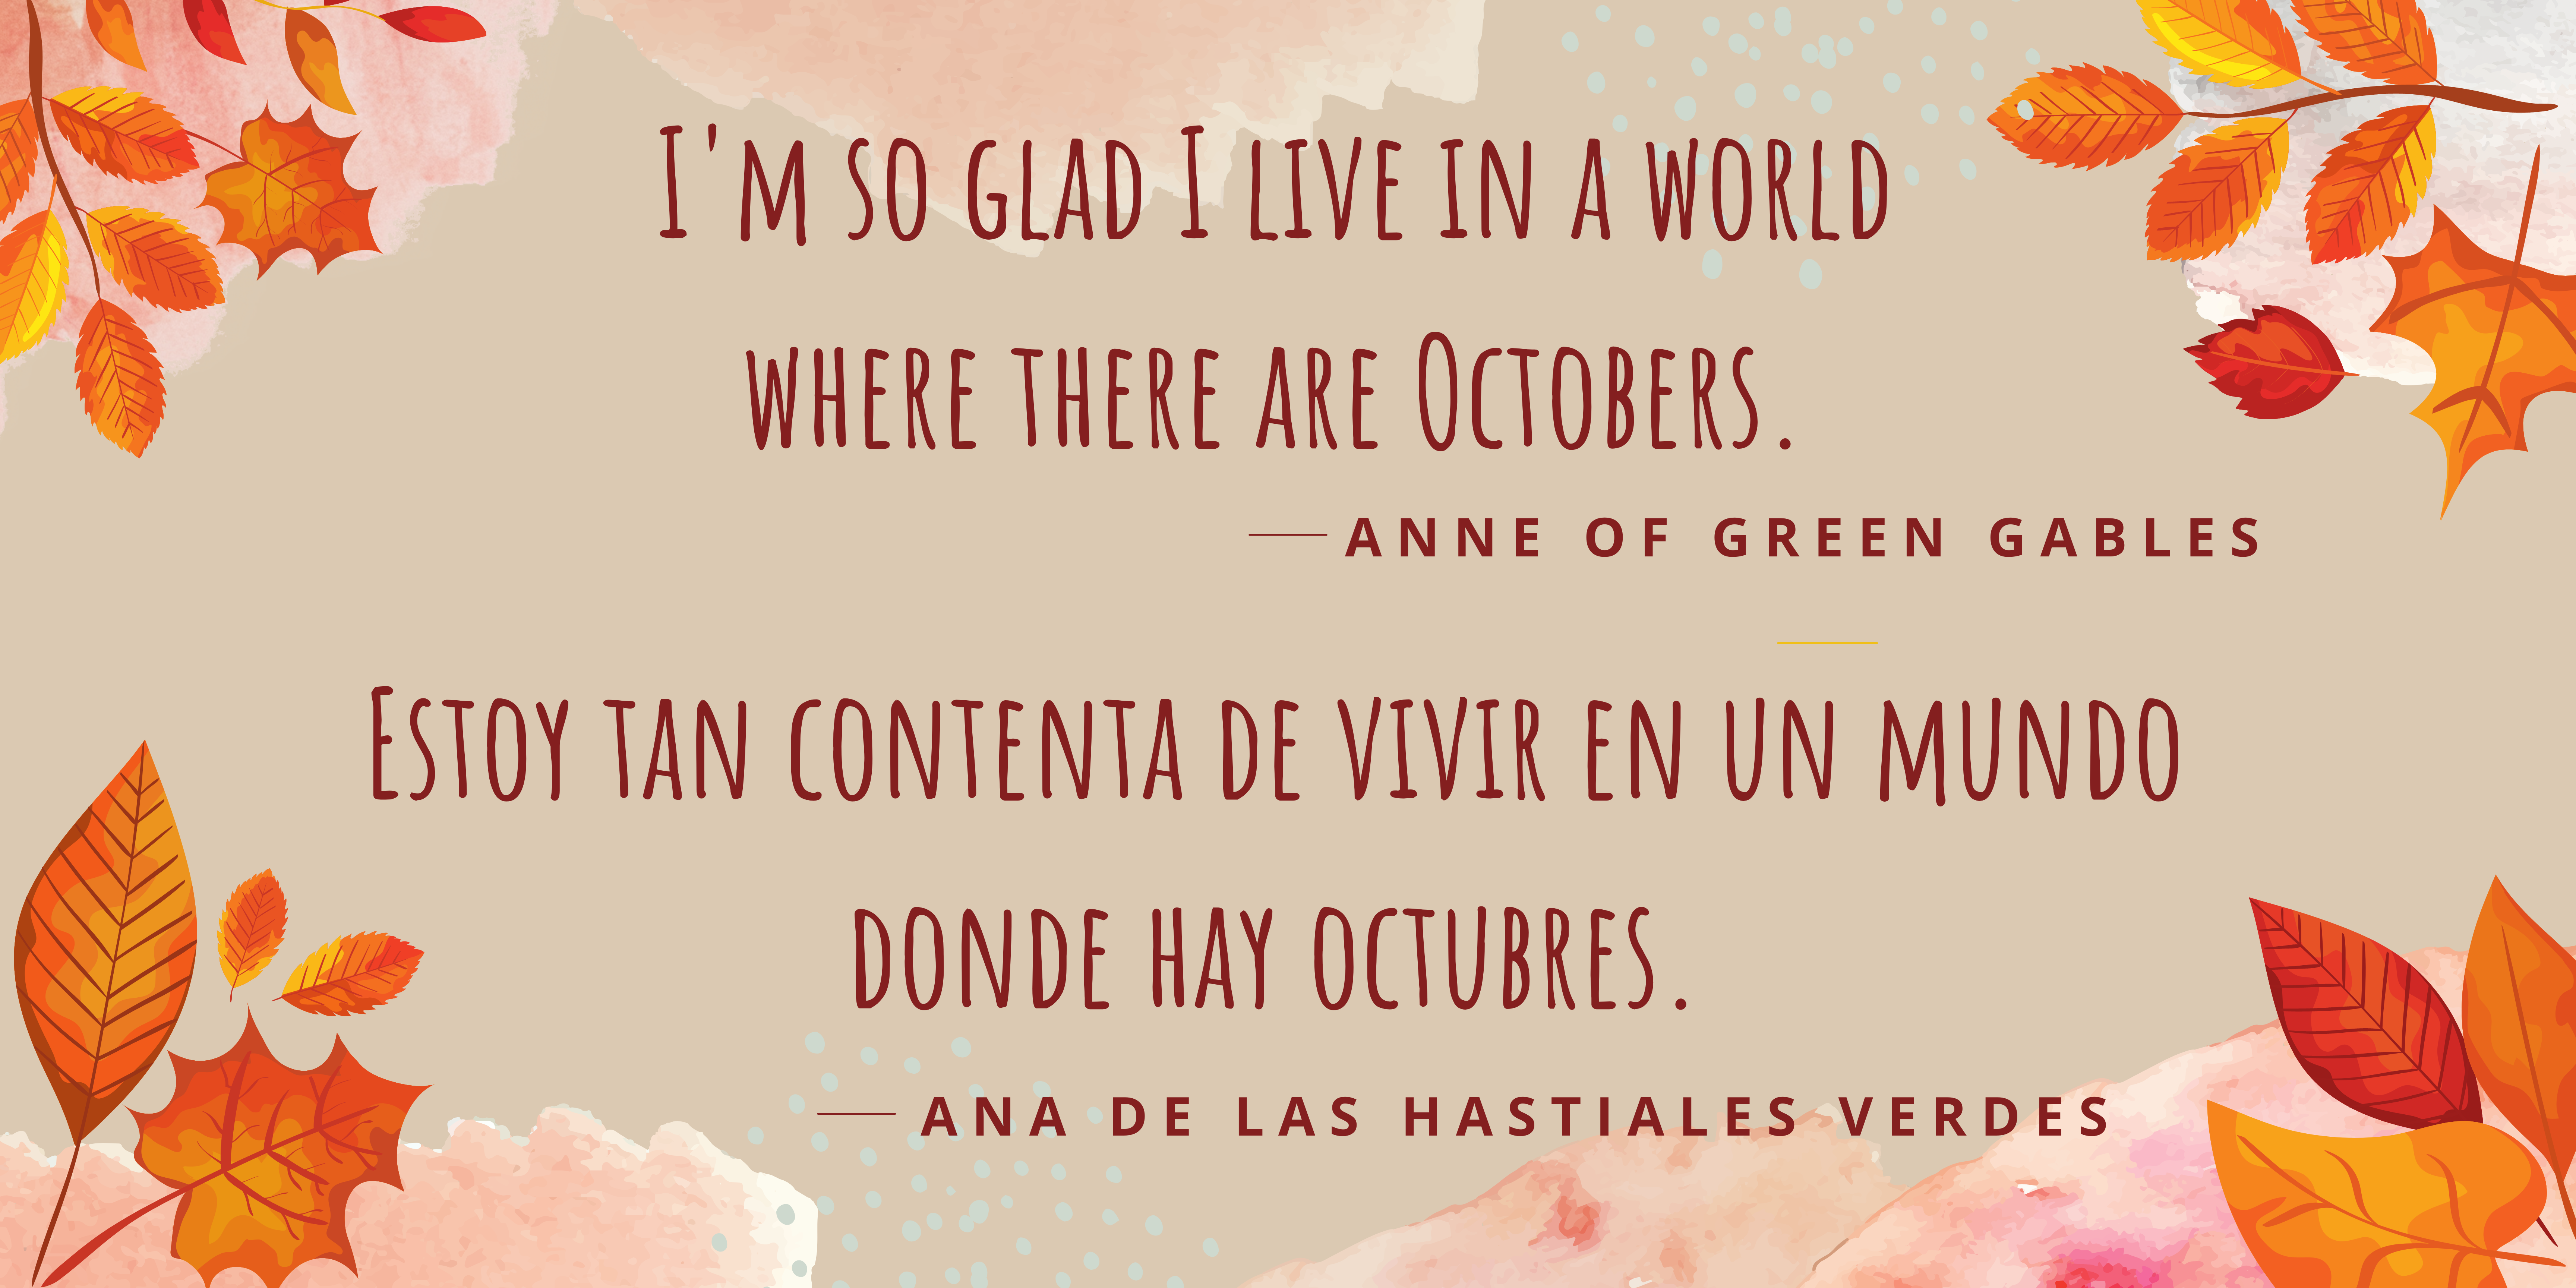 A border of orange fall leaves surrounding the quote, "I'm so glad I live in a world where there are Octobers." - Anne of Green Gables